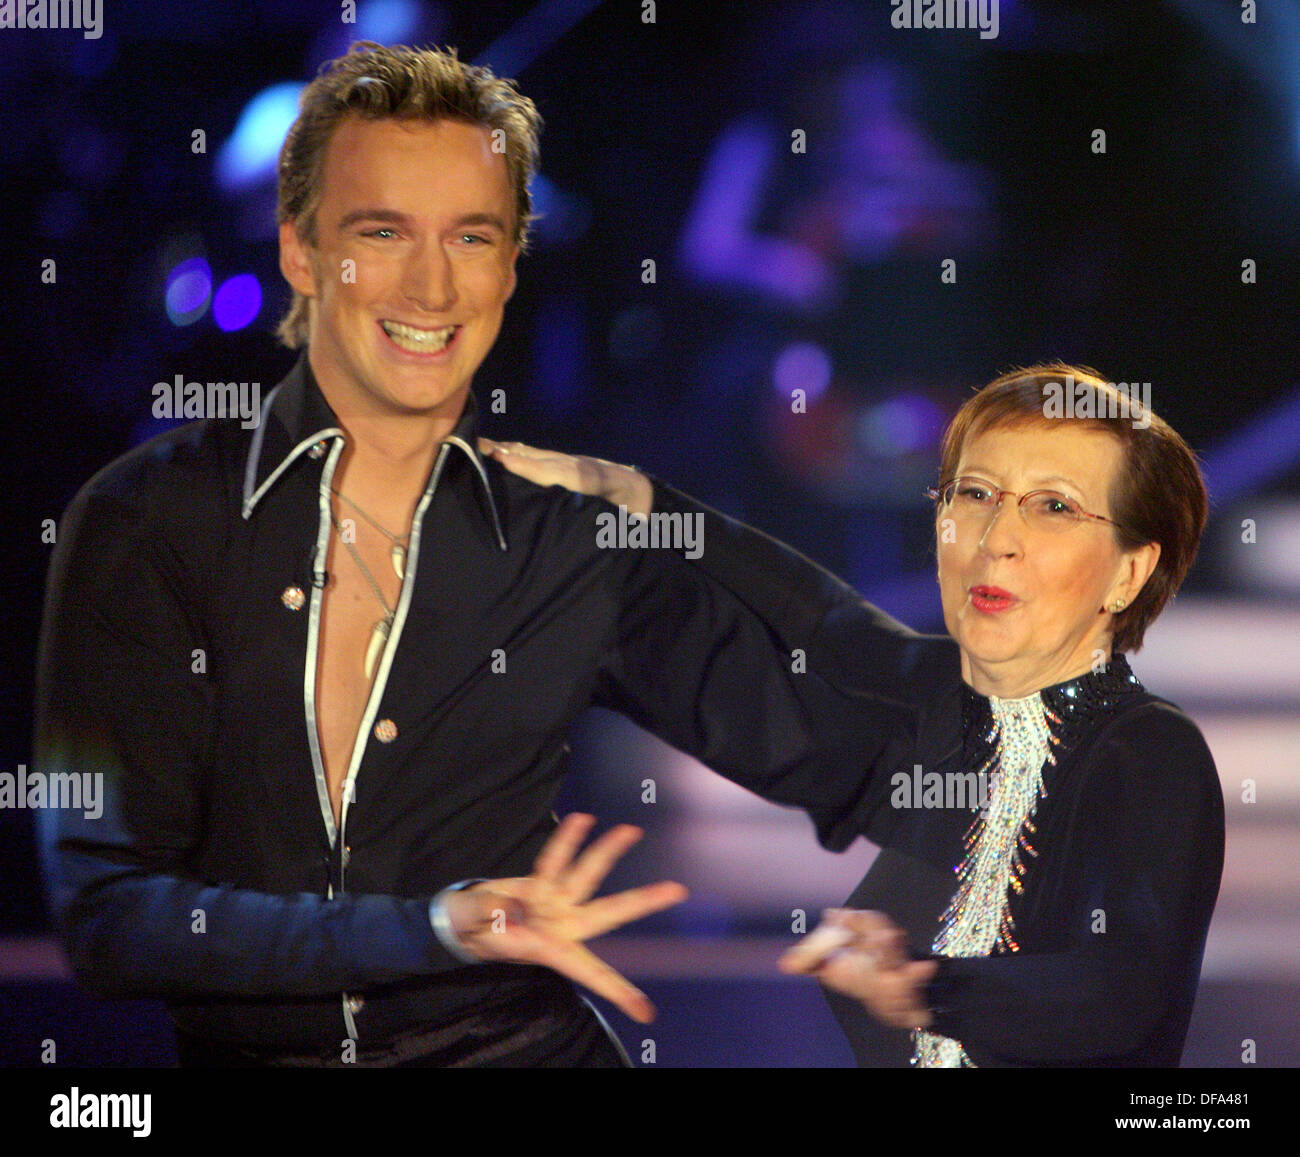 Former minister president Heide Simonis participates in the dance show 'Let's Dance' on the 8th of April in 2006. Stock Photo